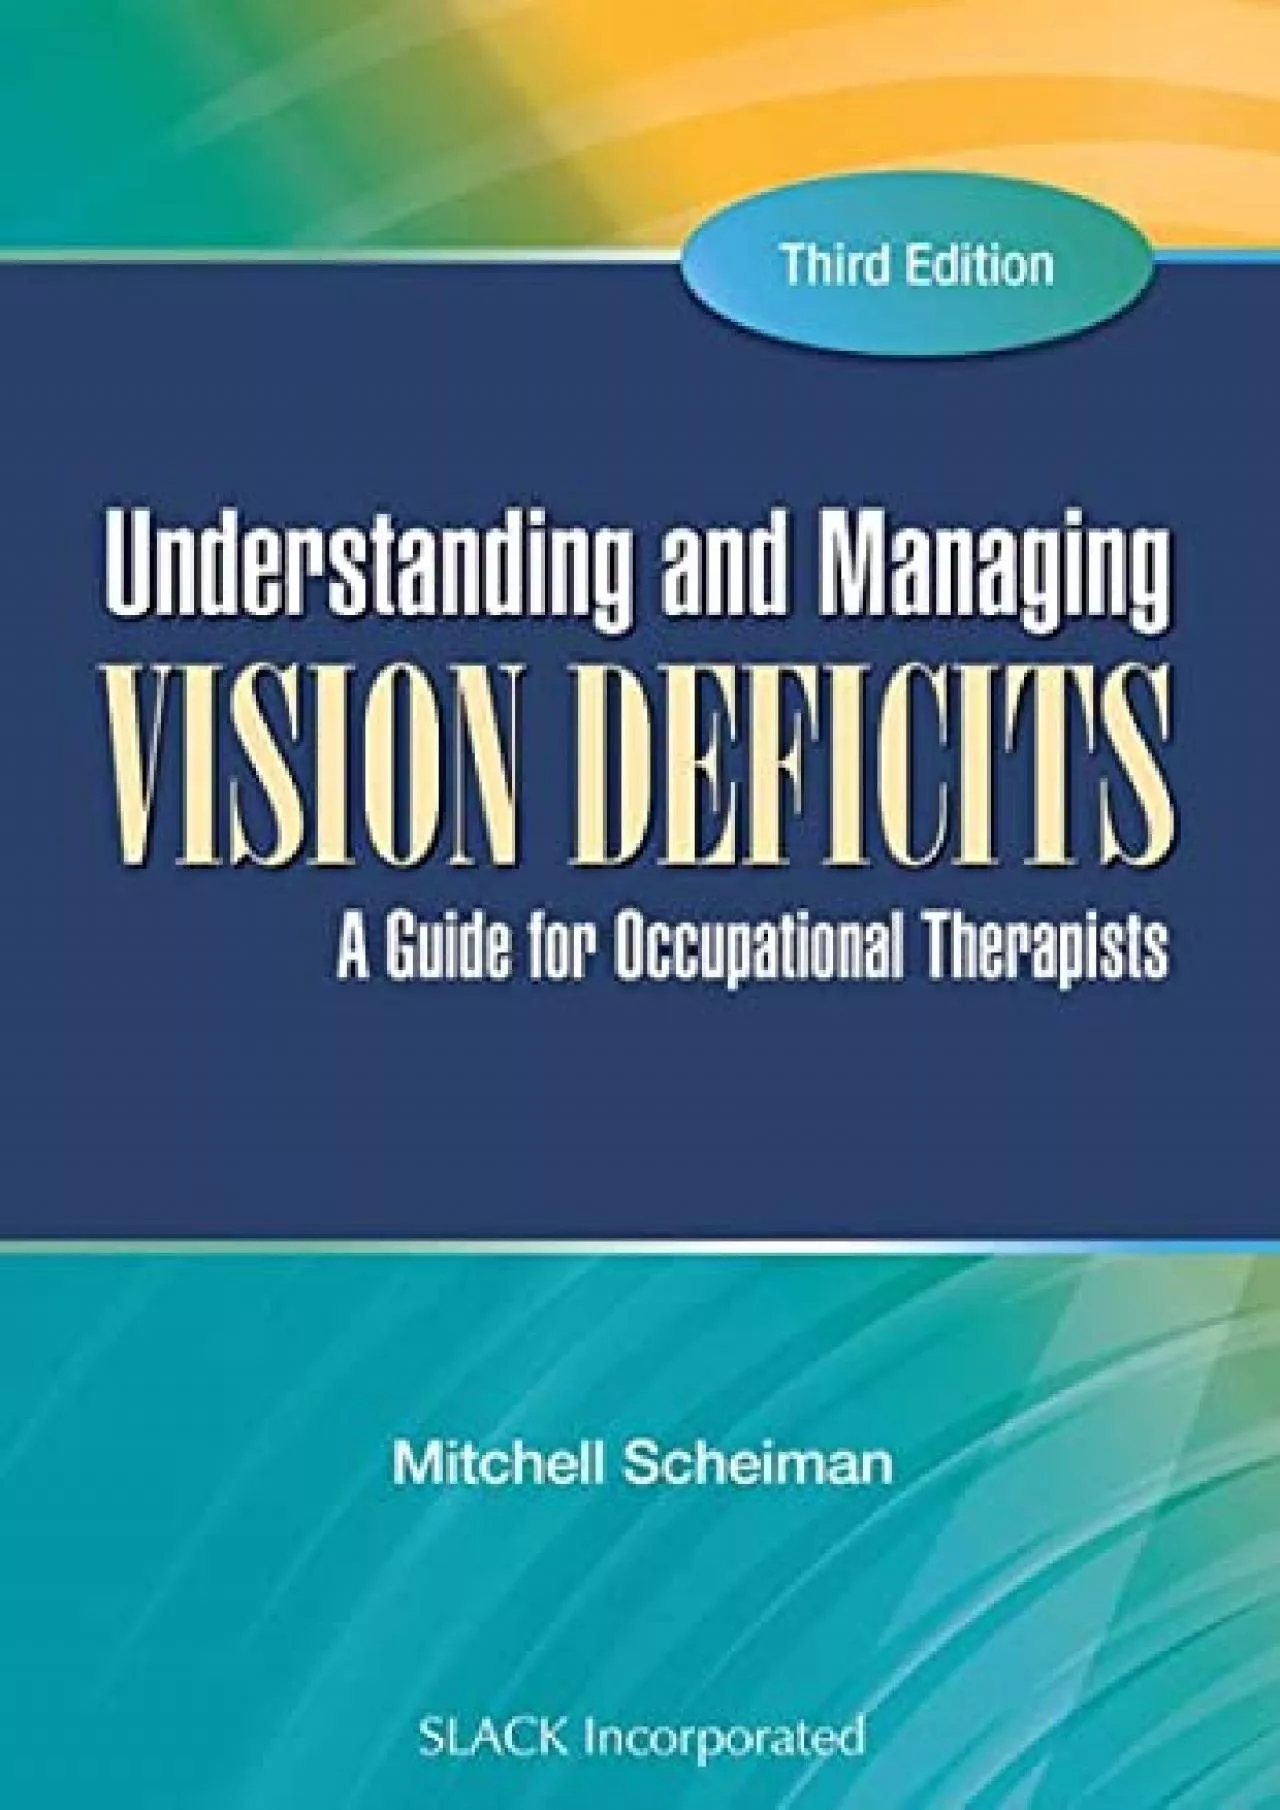 (DOWNLOAD)-Understanding and Managing Vision Deficits: A Guide for Occupational Therapists